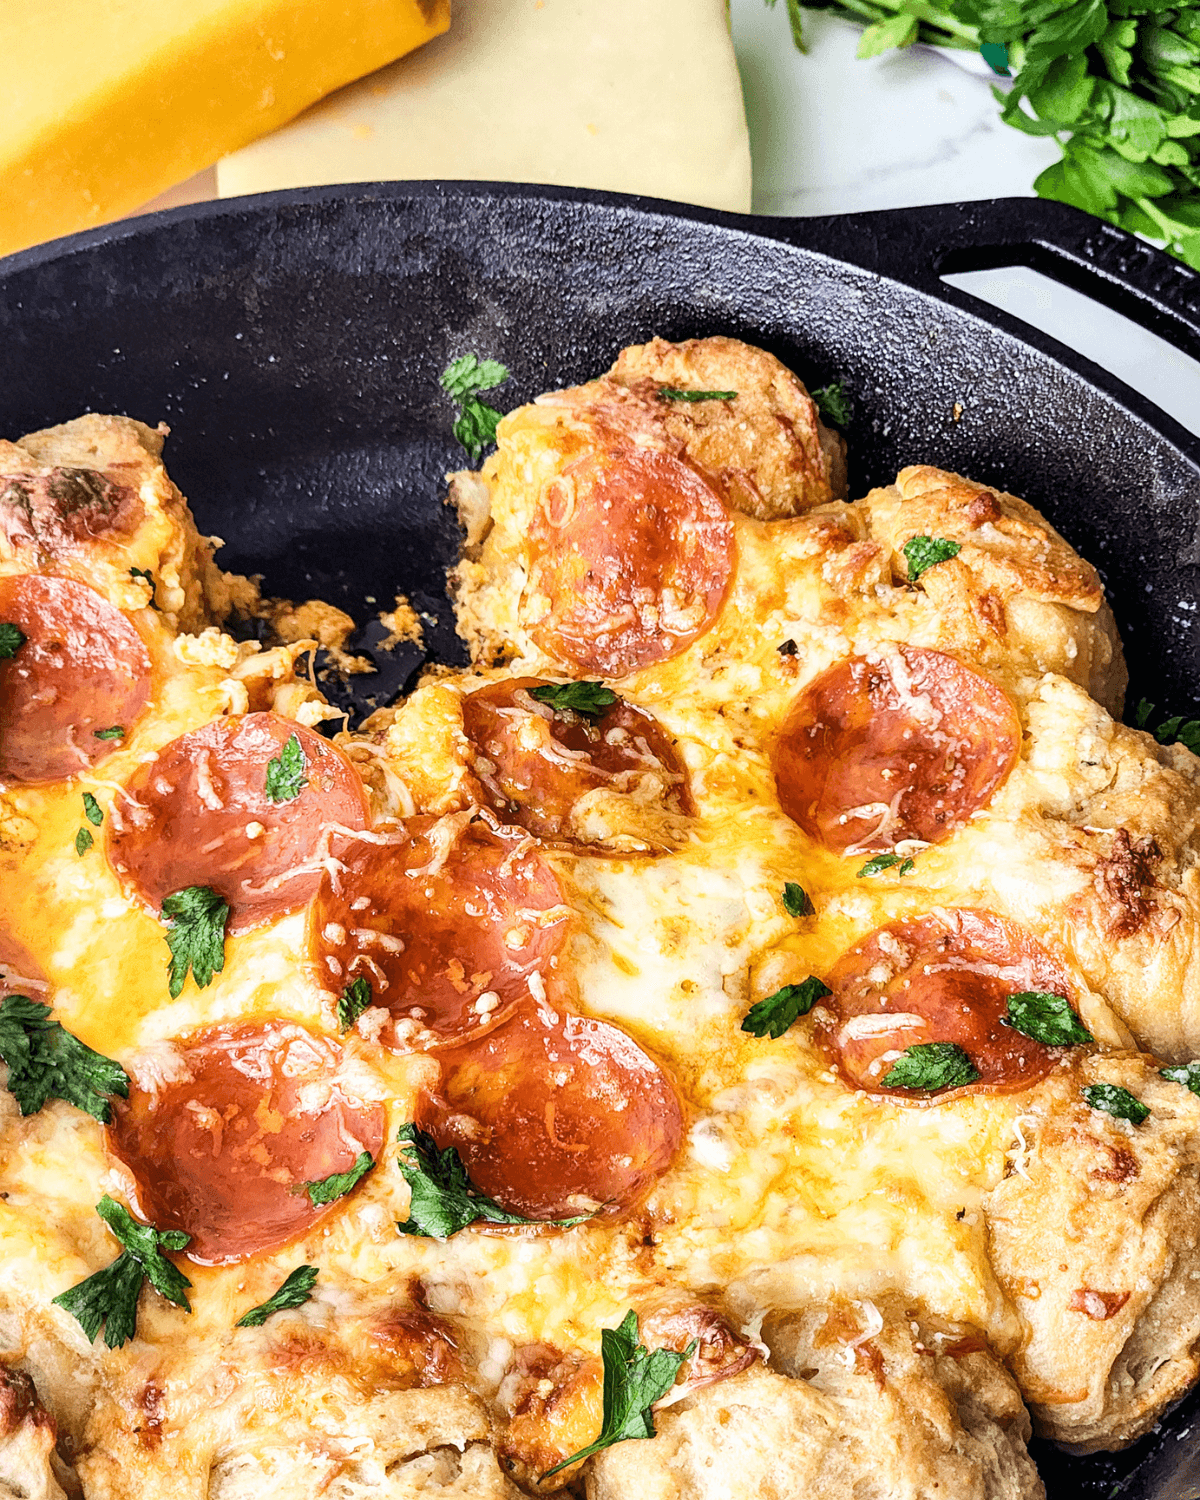 Cheesy tomato-topped cooked in a skillet, garnished with herbs and served as a pizza dip.